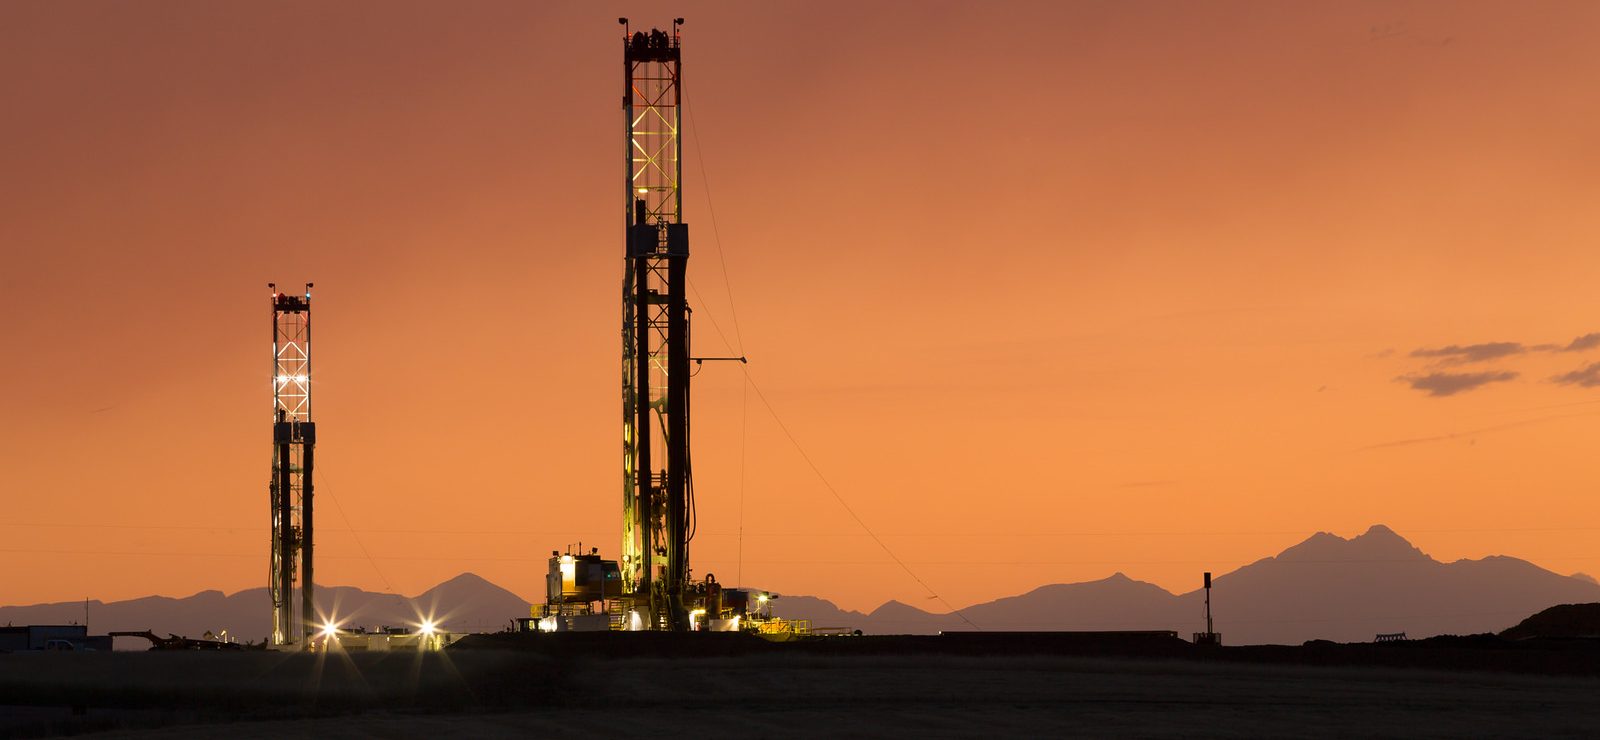 API claims environment benefiting from hydraulic fracturing, is it?